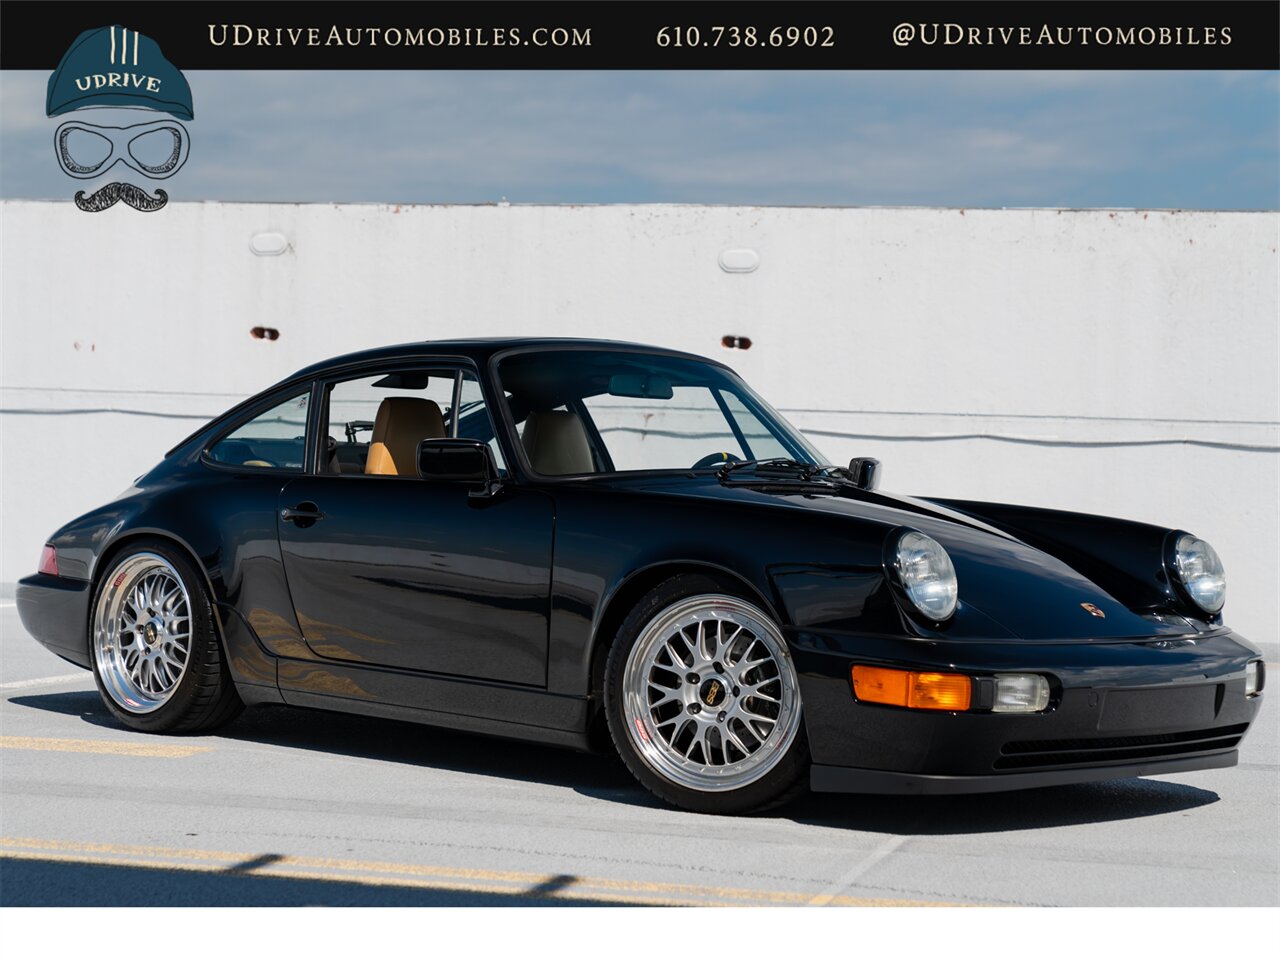 1989 Porsche 911 Carrera 4  964 C4 5 Speed Manual $63k Recent Service and Upgrades - Photo 3 - West Chester, PA 19382